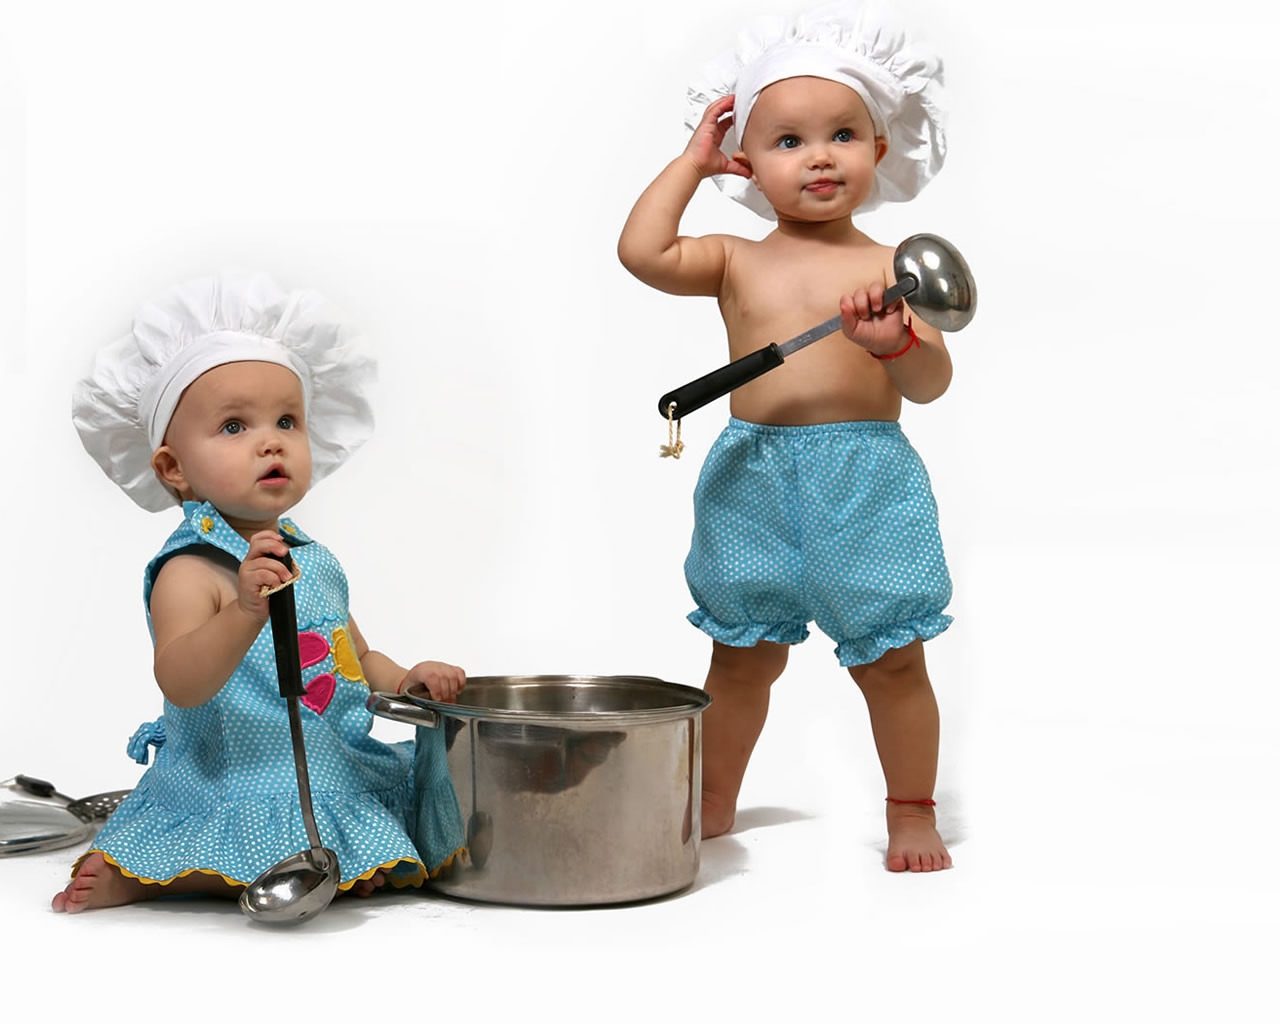 Baby Cook for 1280 x 1024 resolution